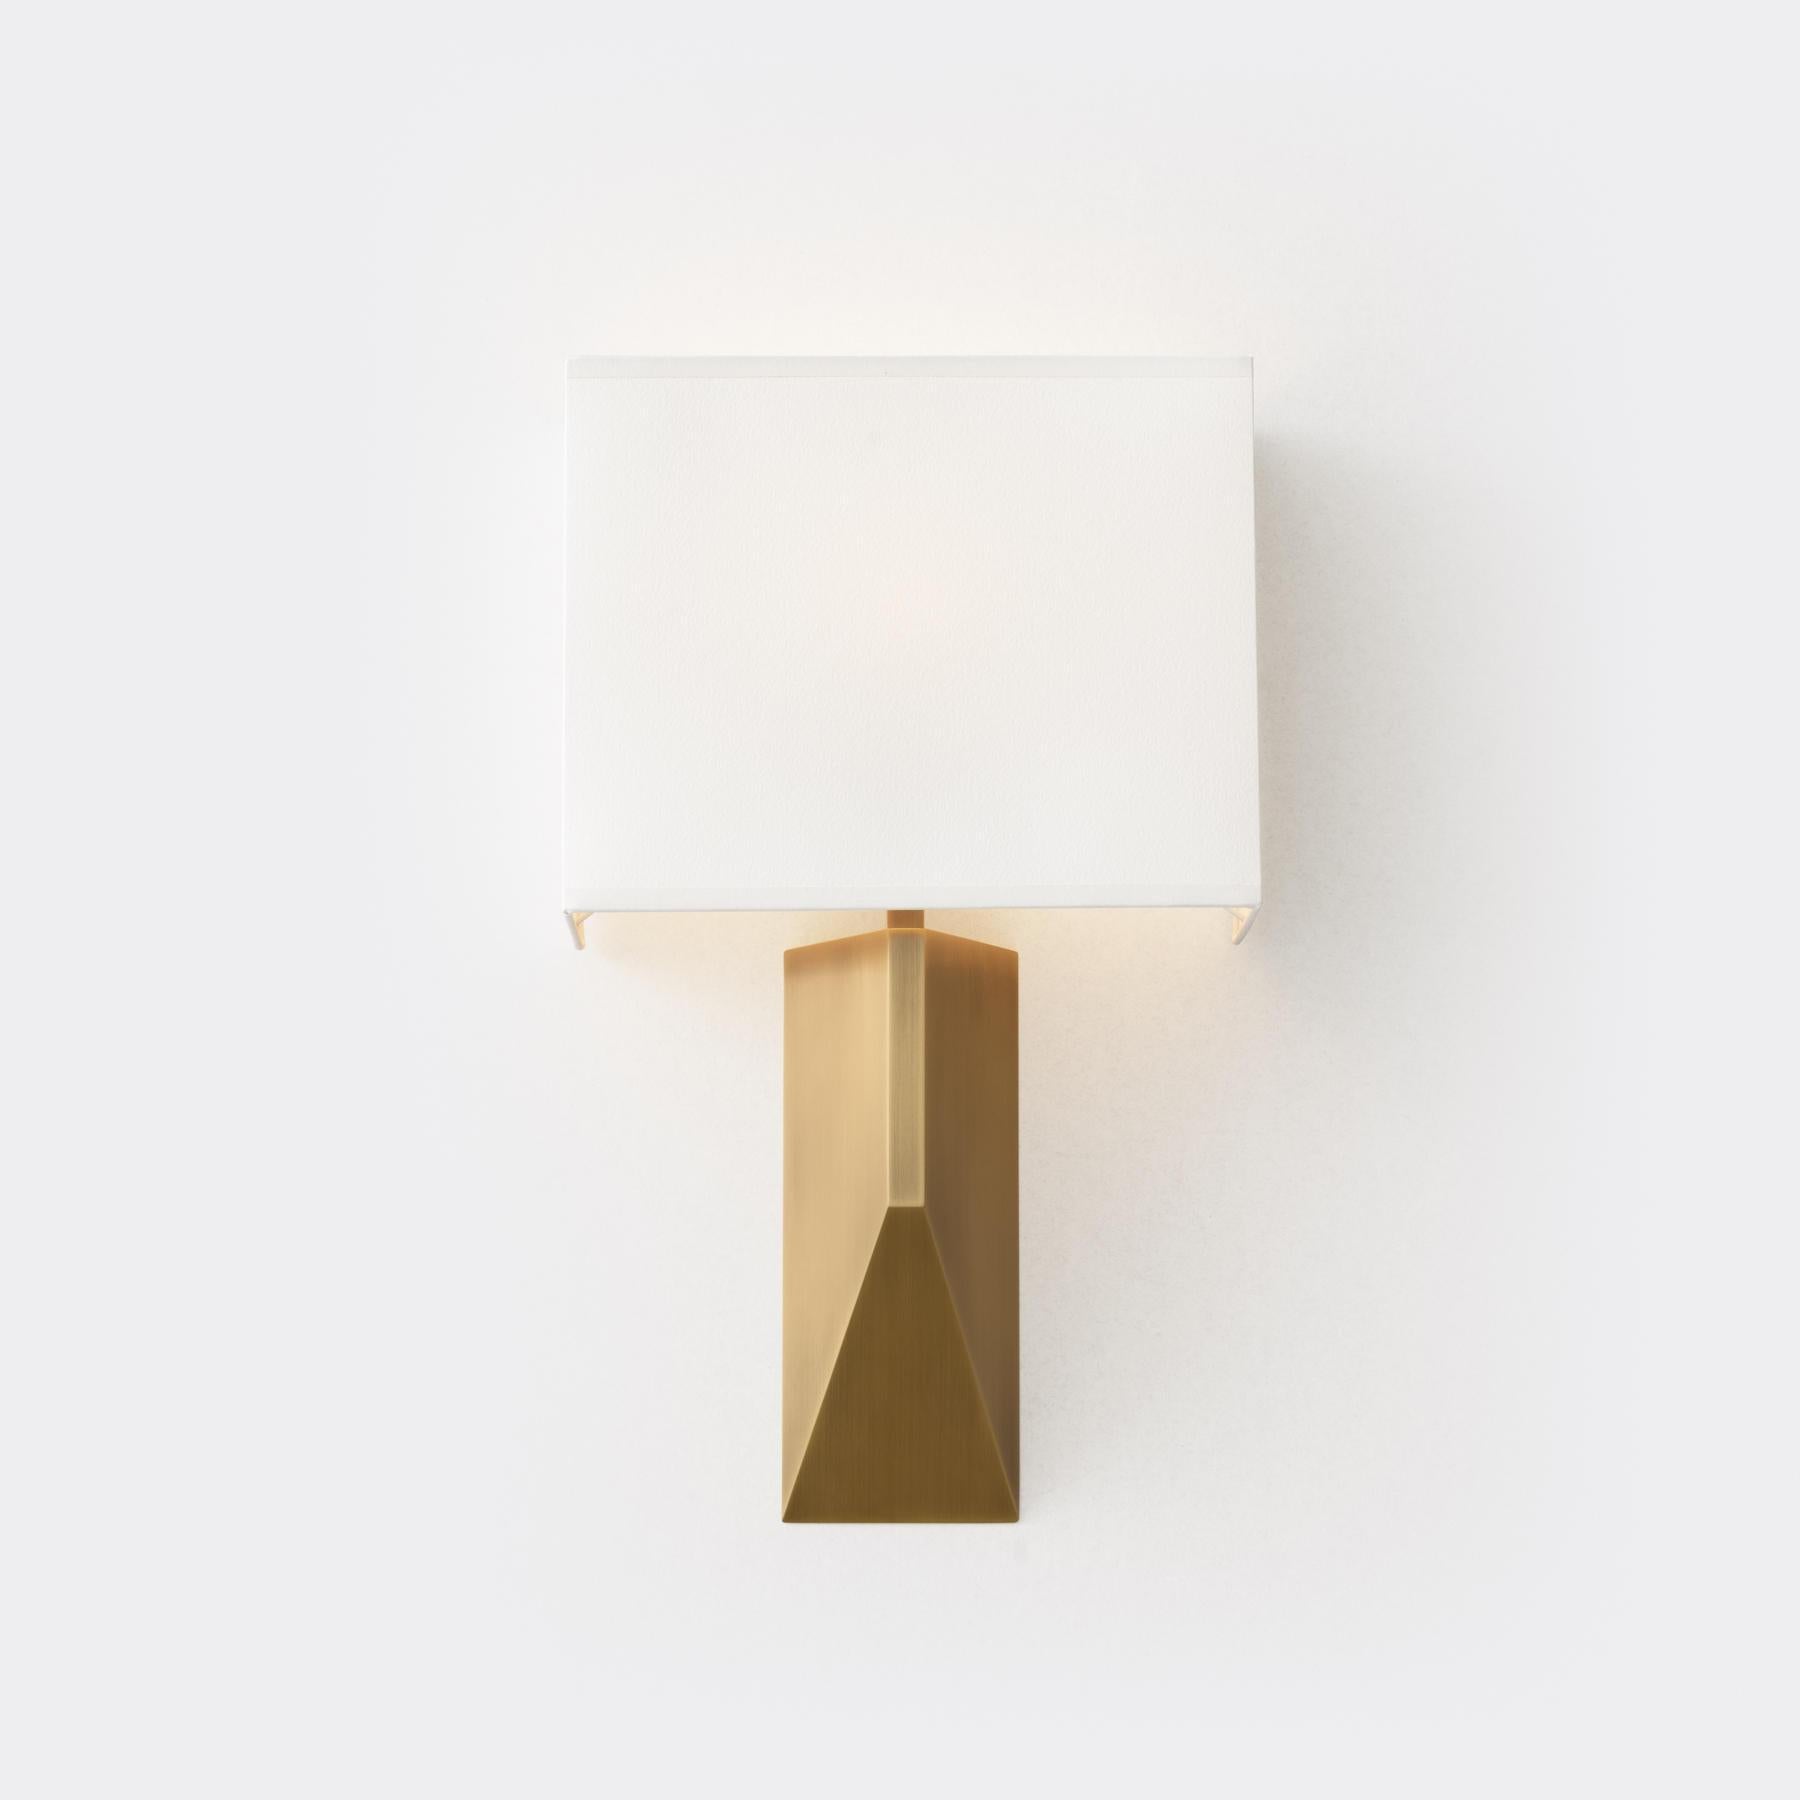 Our Volume Sconce is a statuesque design with a substantial architectural base that appears as a revised pyramid when viewed in profile. It is topped by a three-sided aquarelle shade, allowing for tight mounting to a wall.